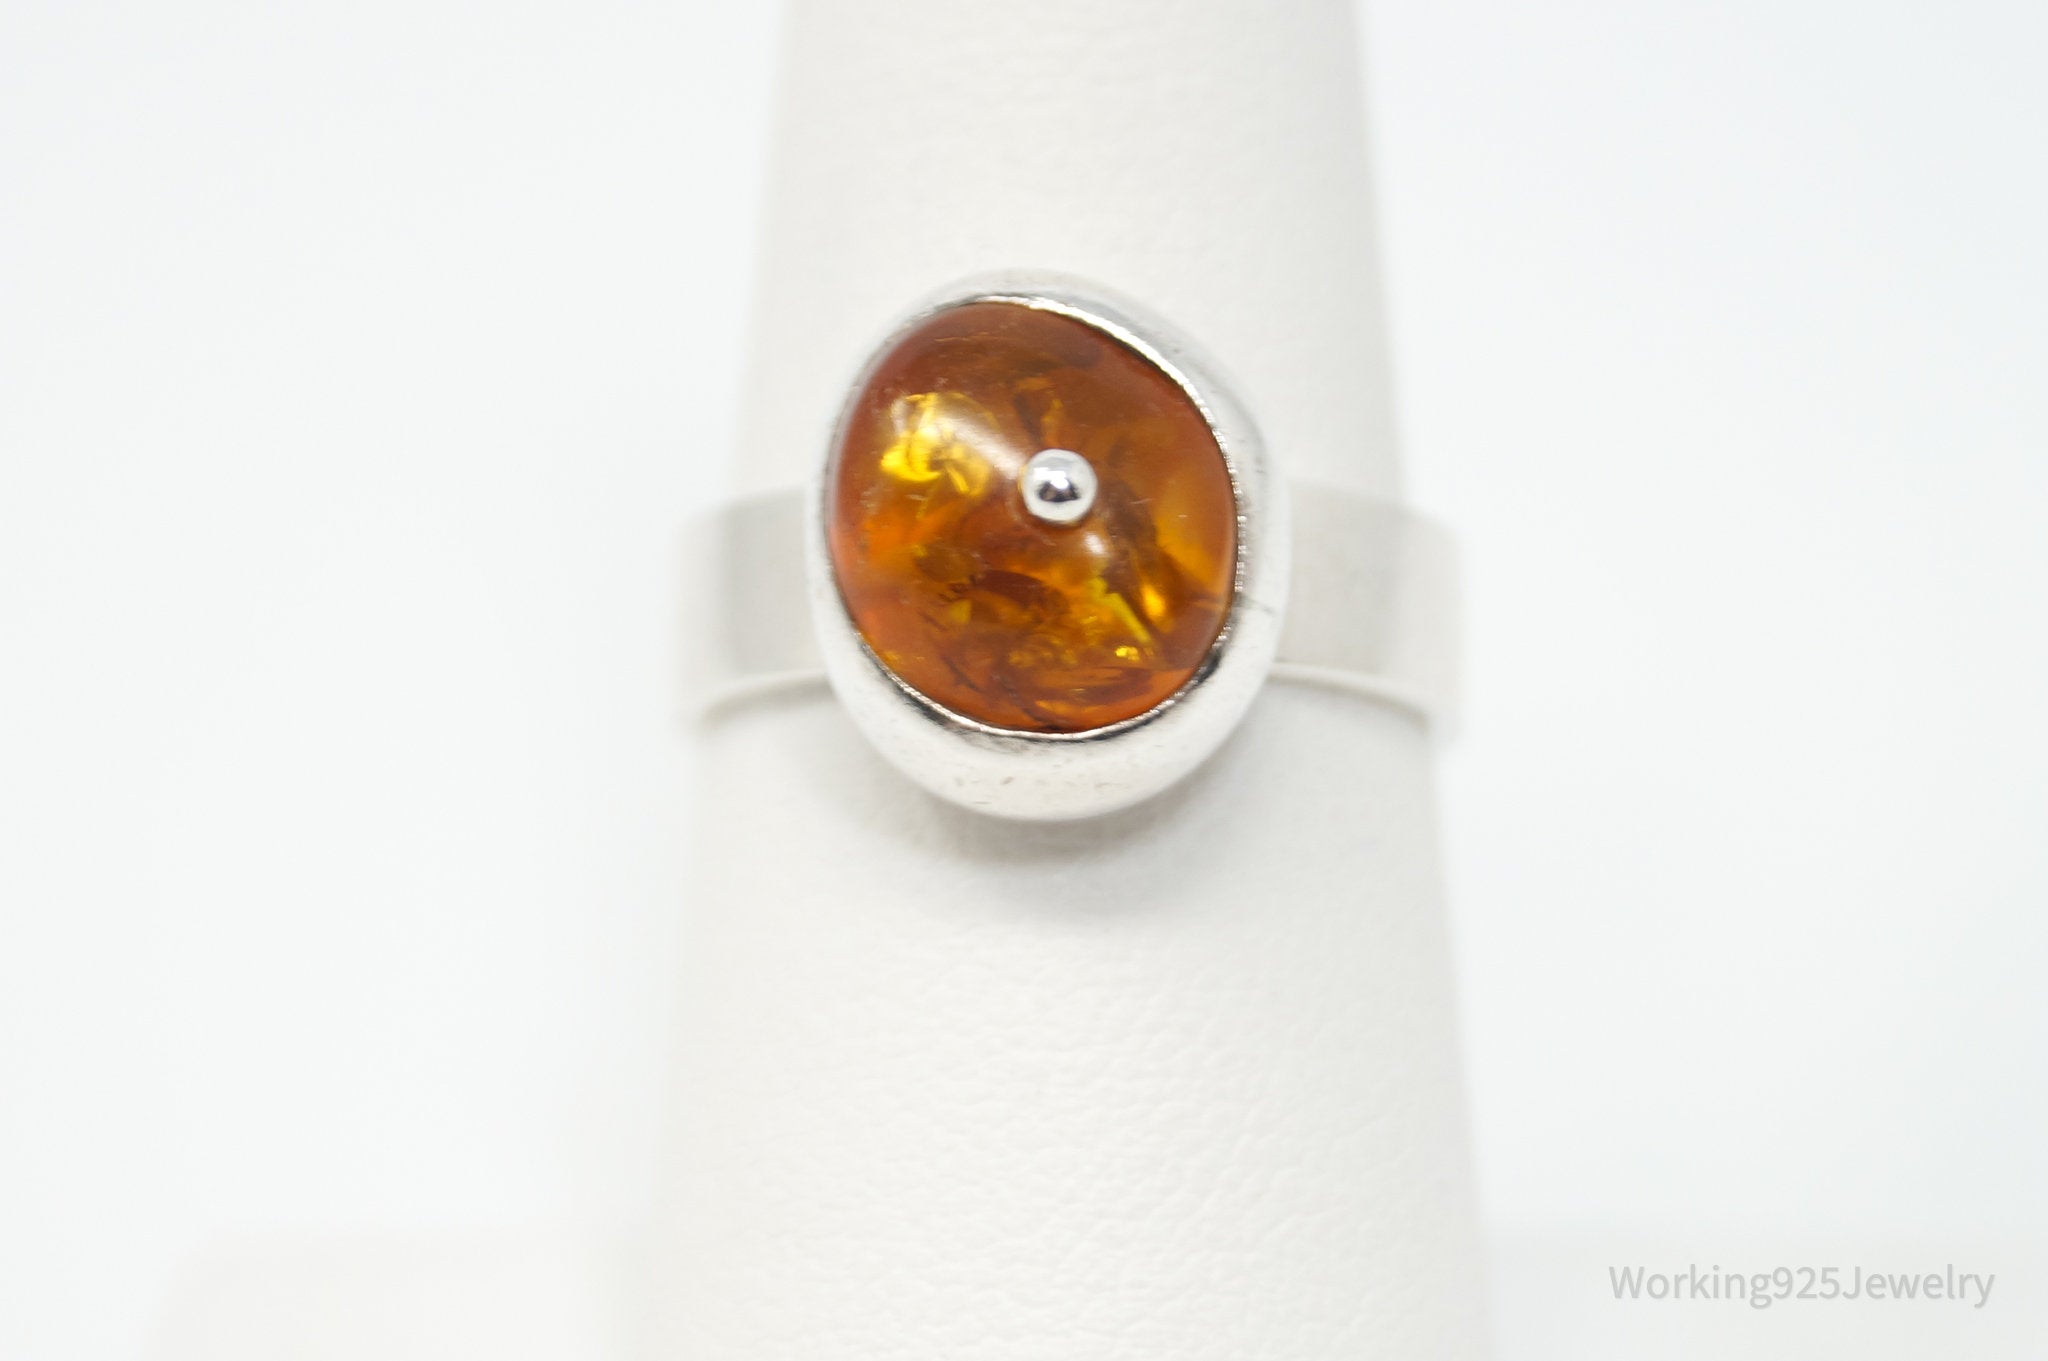 Vintage Unique Baltic Amber Sterling Silver Dot Ring - Size 7